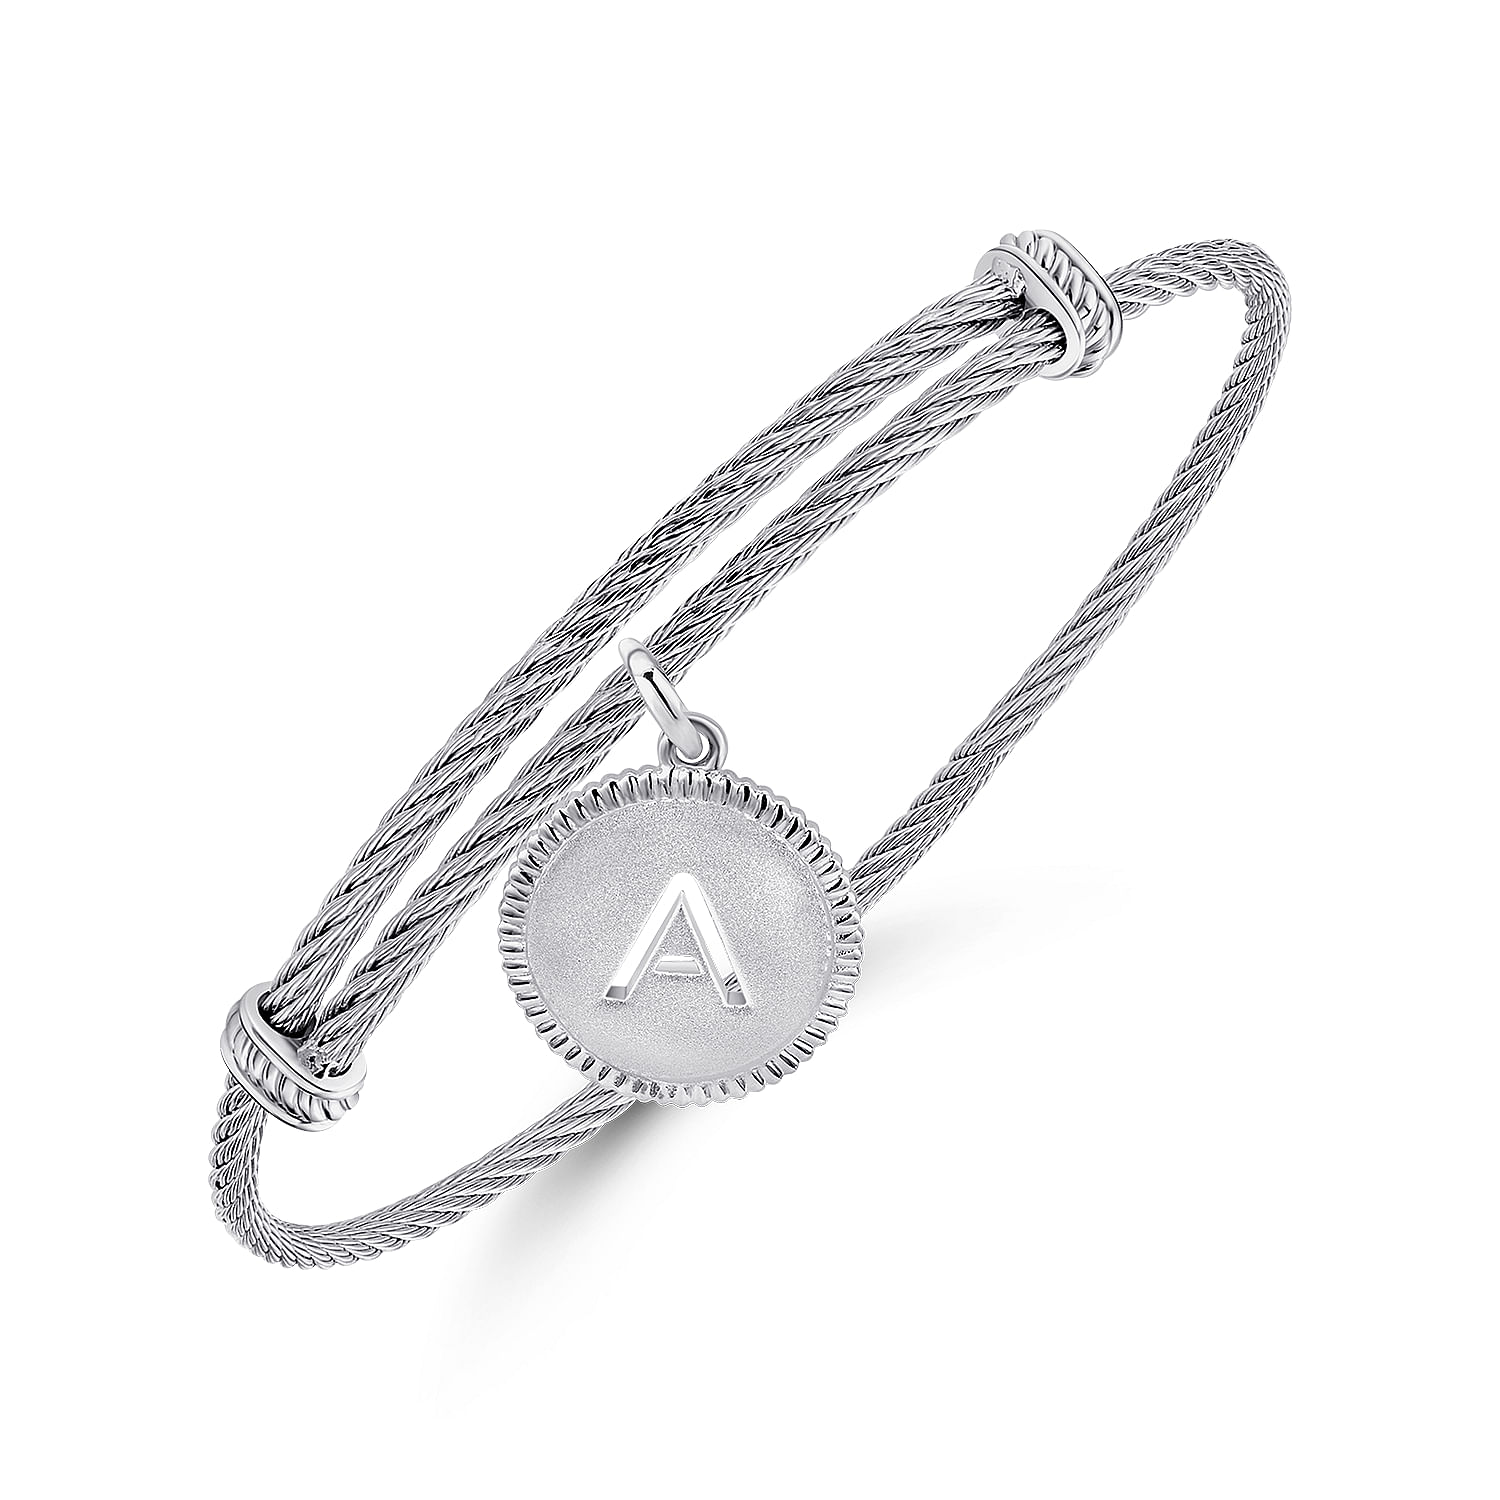 Adjustable Twisted Cable Stainless Steel Bangle with Sterling Silver A Initial Charm